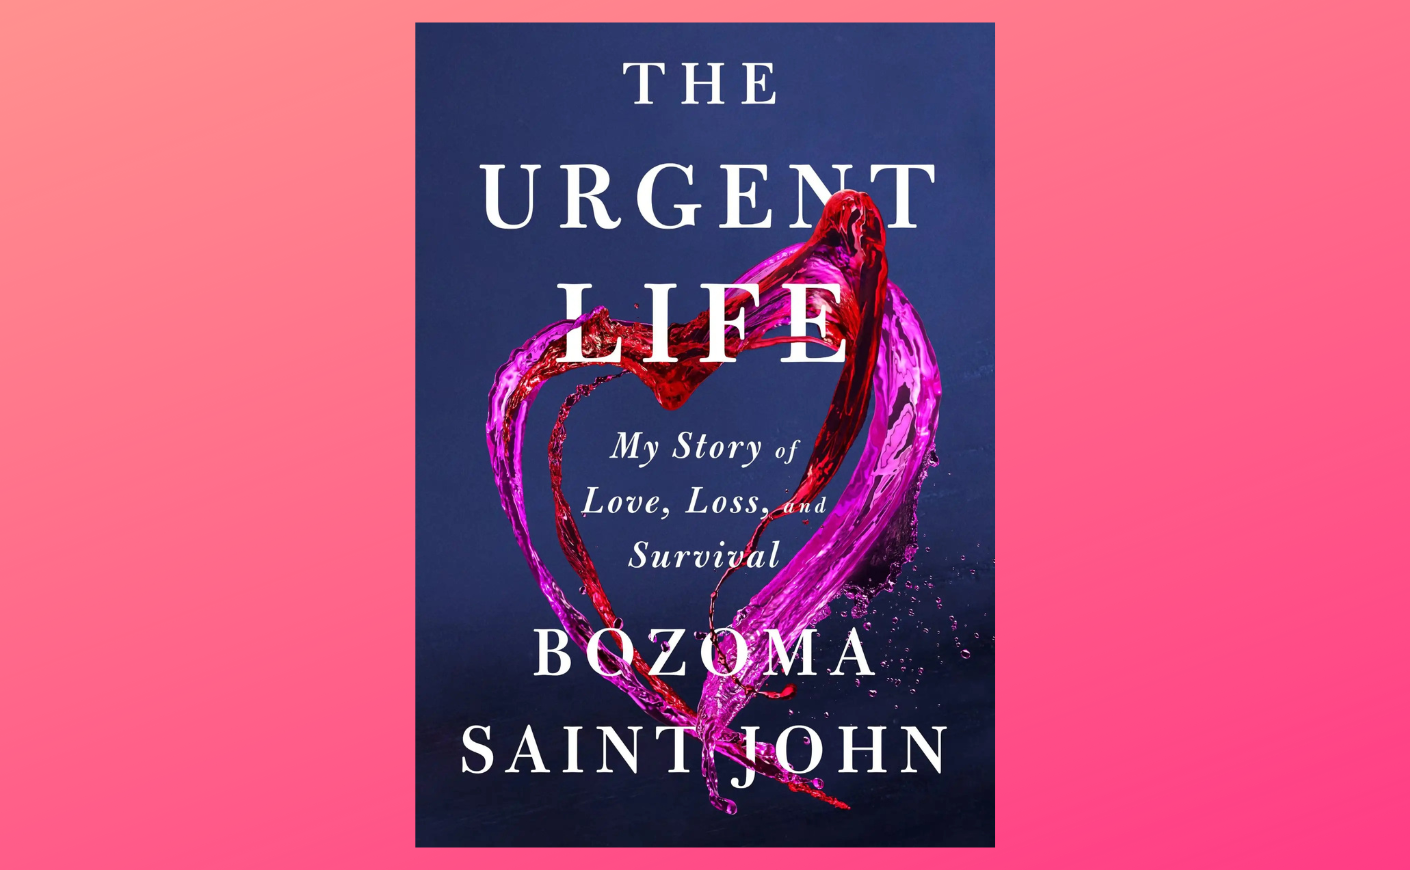 The book cover of "The Urgent Life: My Story of Love, Loss, and Survival" by Bozoma Saint John